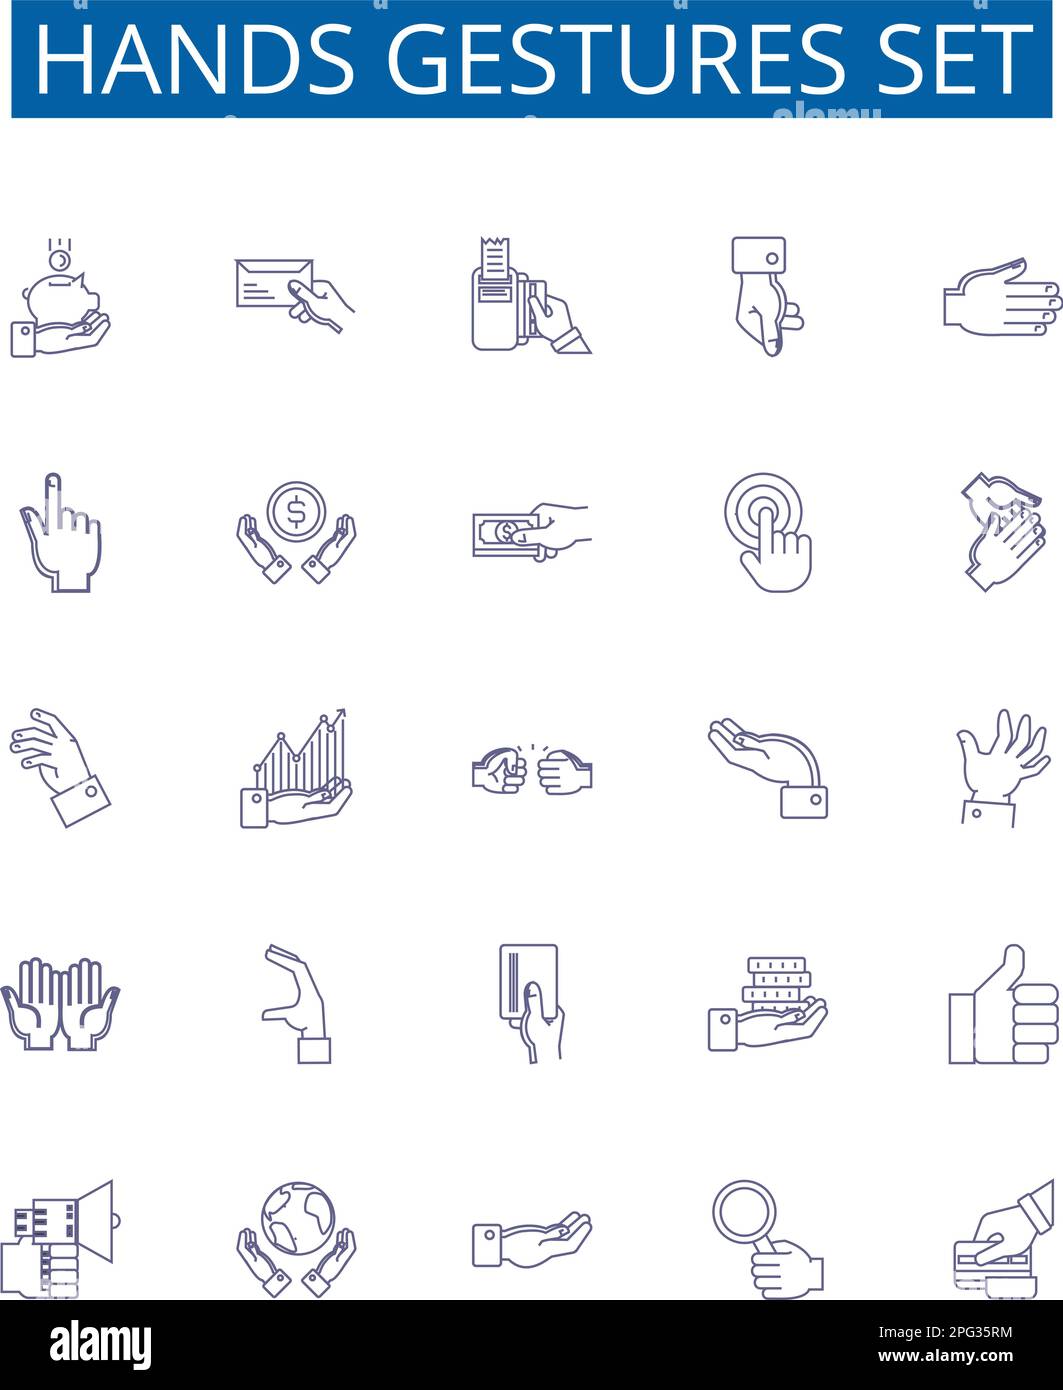 Hands gestures set line icons signs set. Design collection of Gesticulate, Waving, Pointing, Grasping, Clasping, Signaling, Flourishing, Flicking Stock Vector